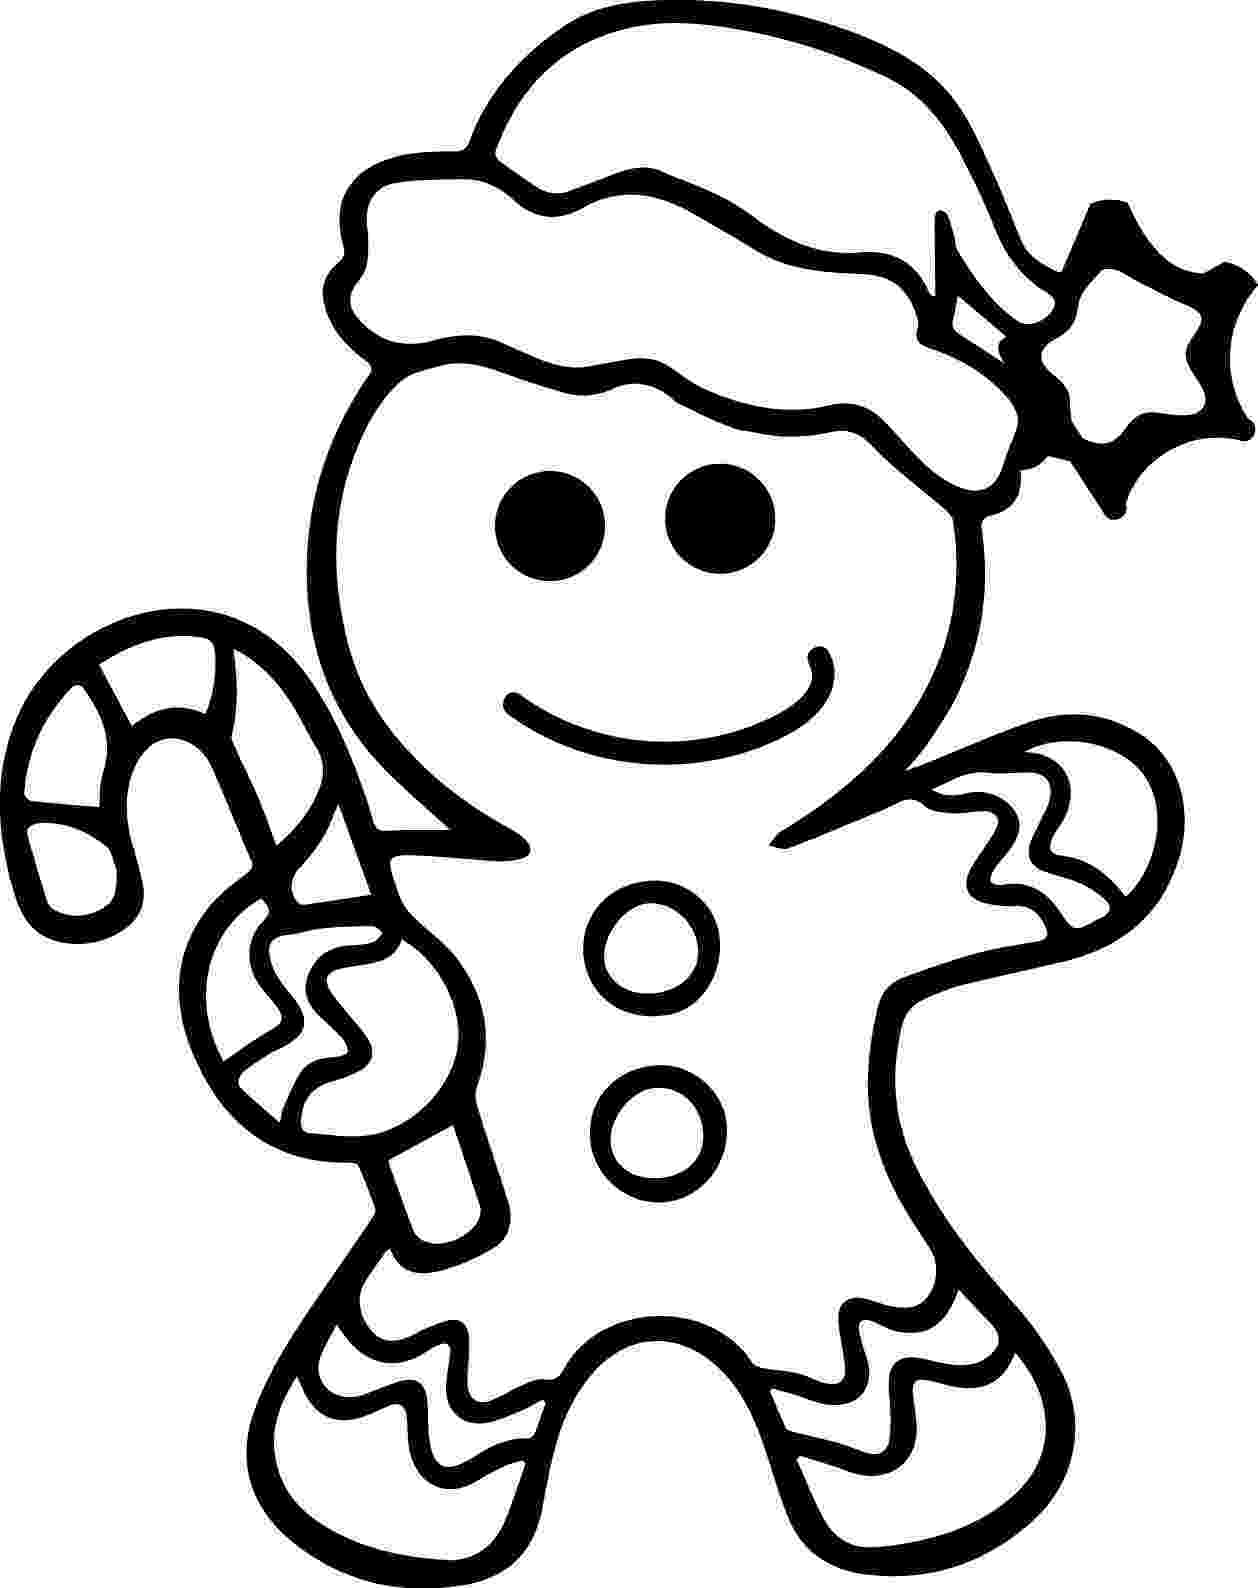 picture of gingerbread man to color how to make a paper gingerbread man embellishment no dies of color gingerbread picture to man 